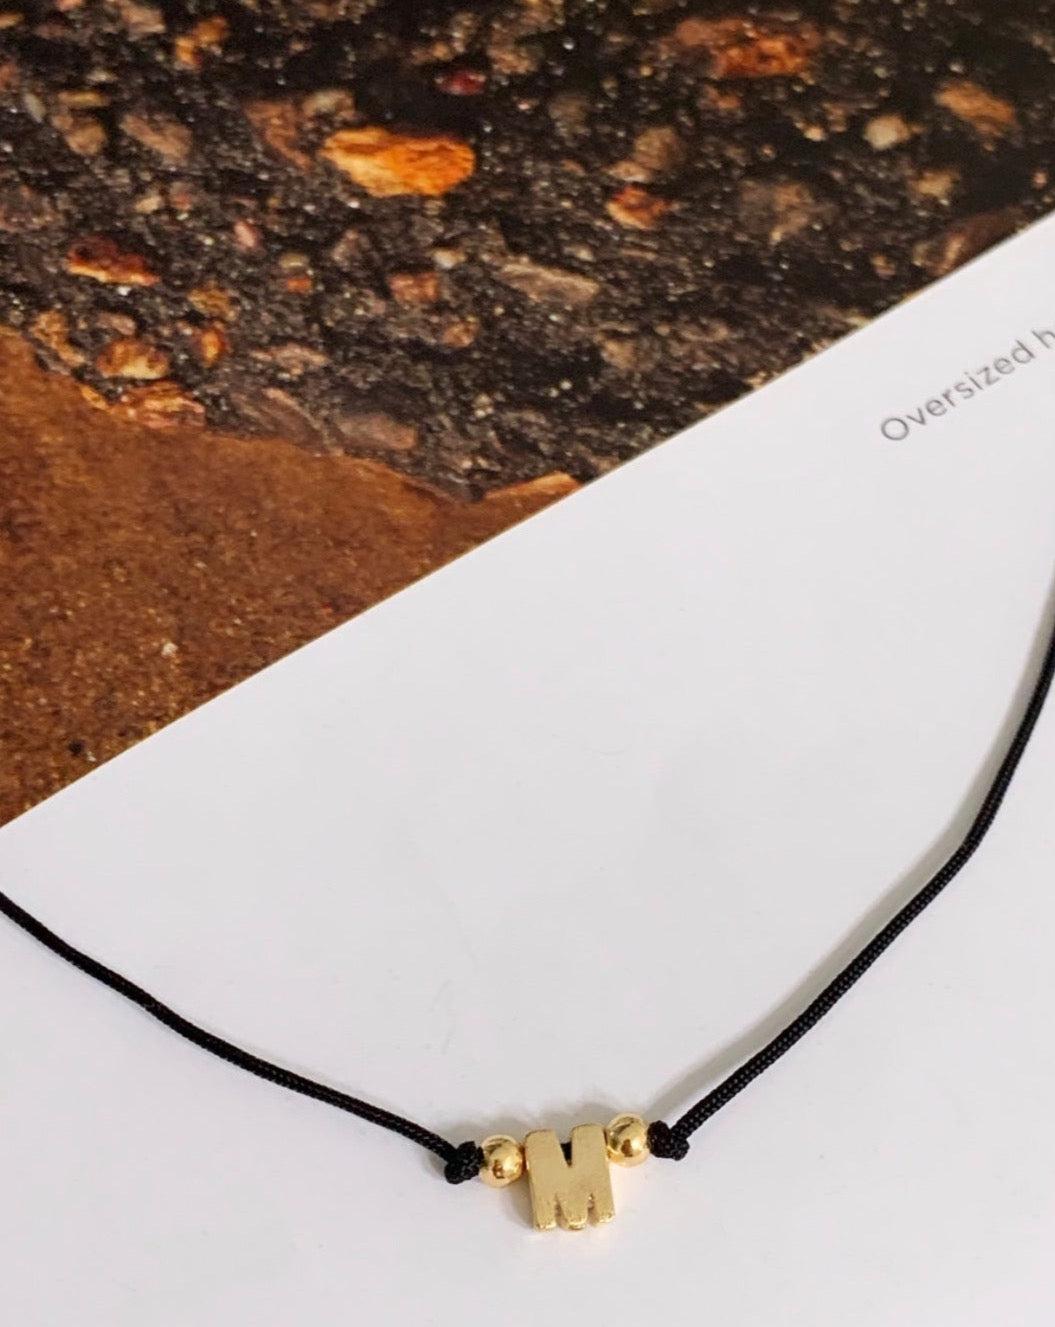 Initial Necklace - LimaLimón Store